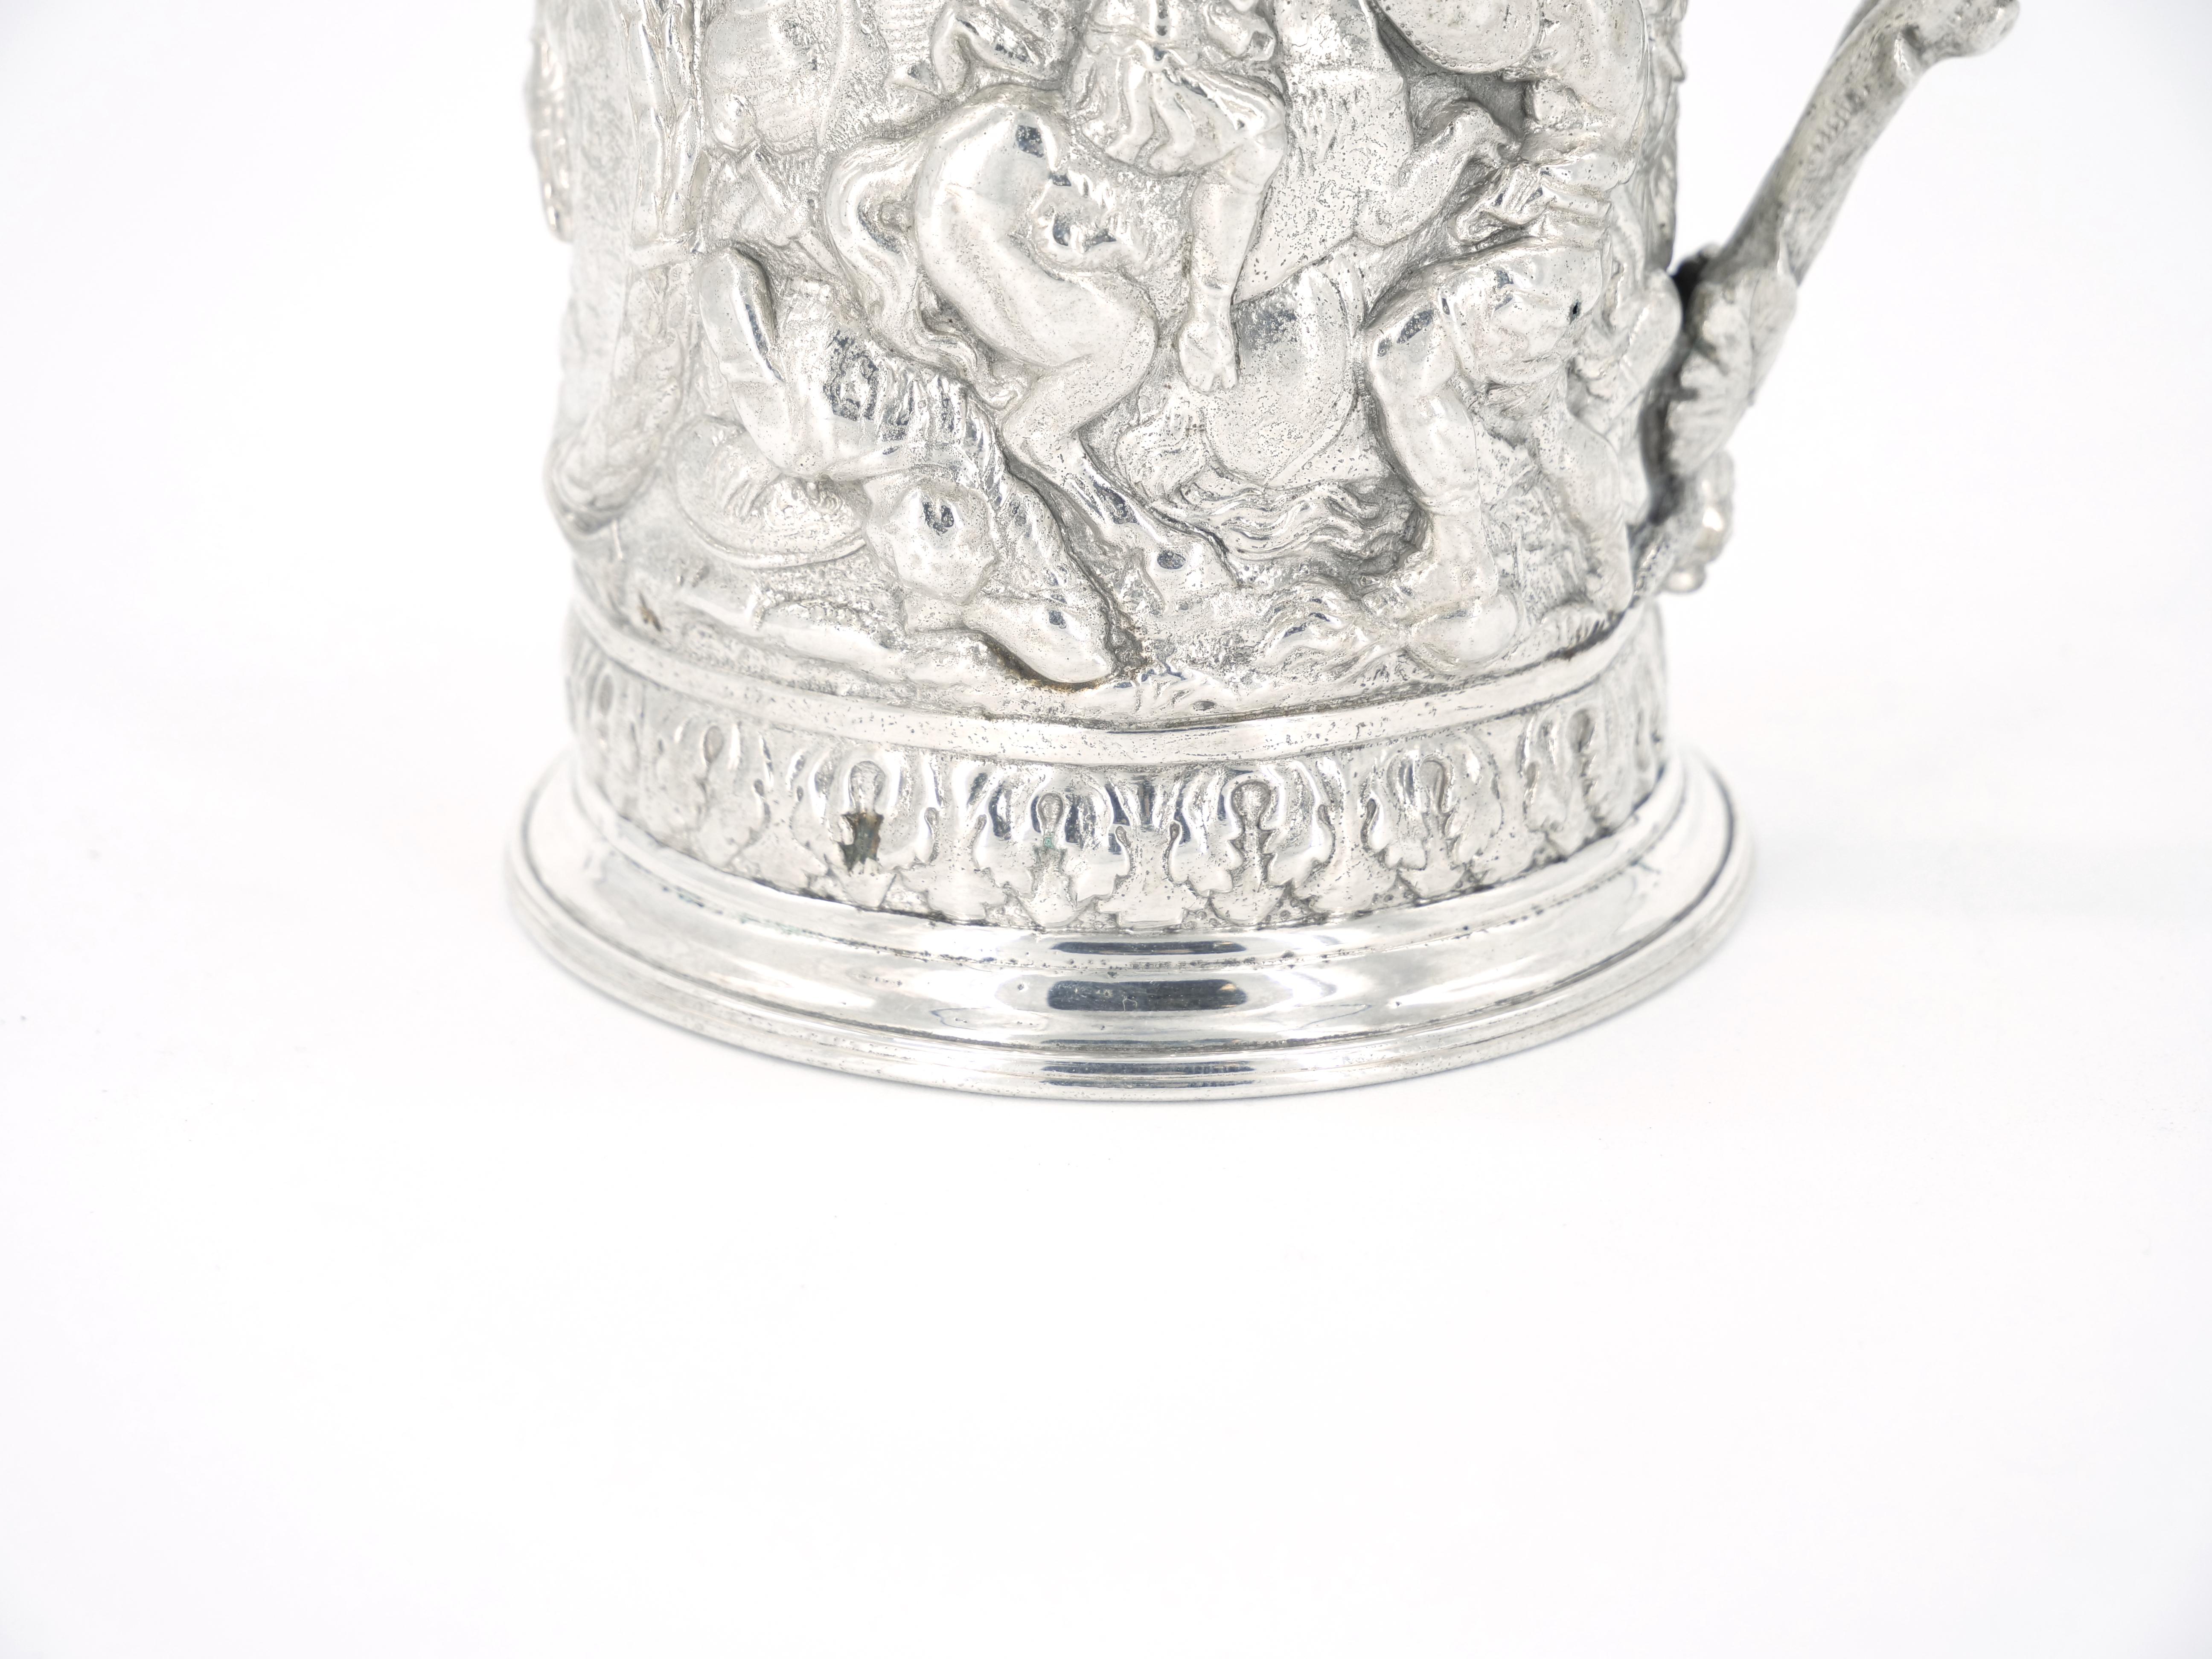 Silver Plate 19th Century English Silverplate Barware Mug Depicting Knights in Battle For Sale